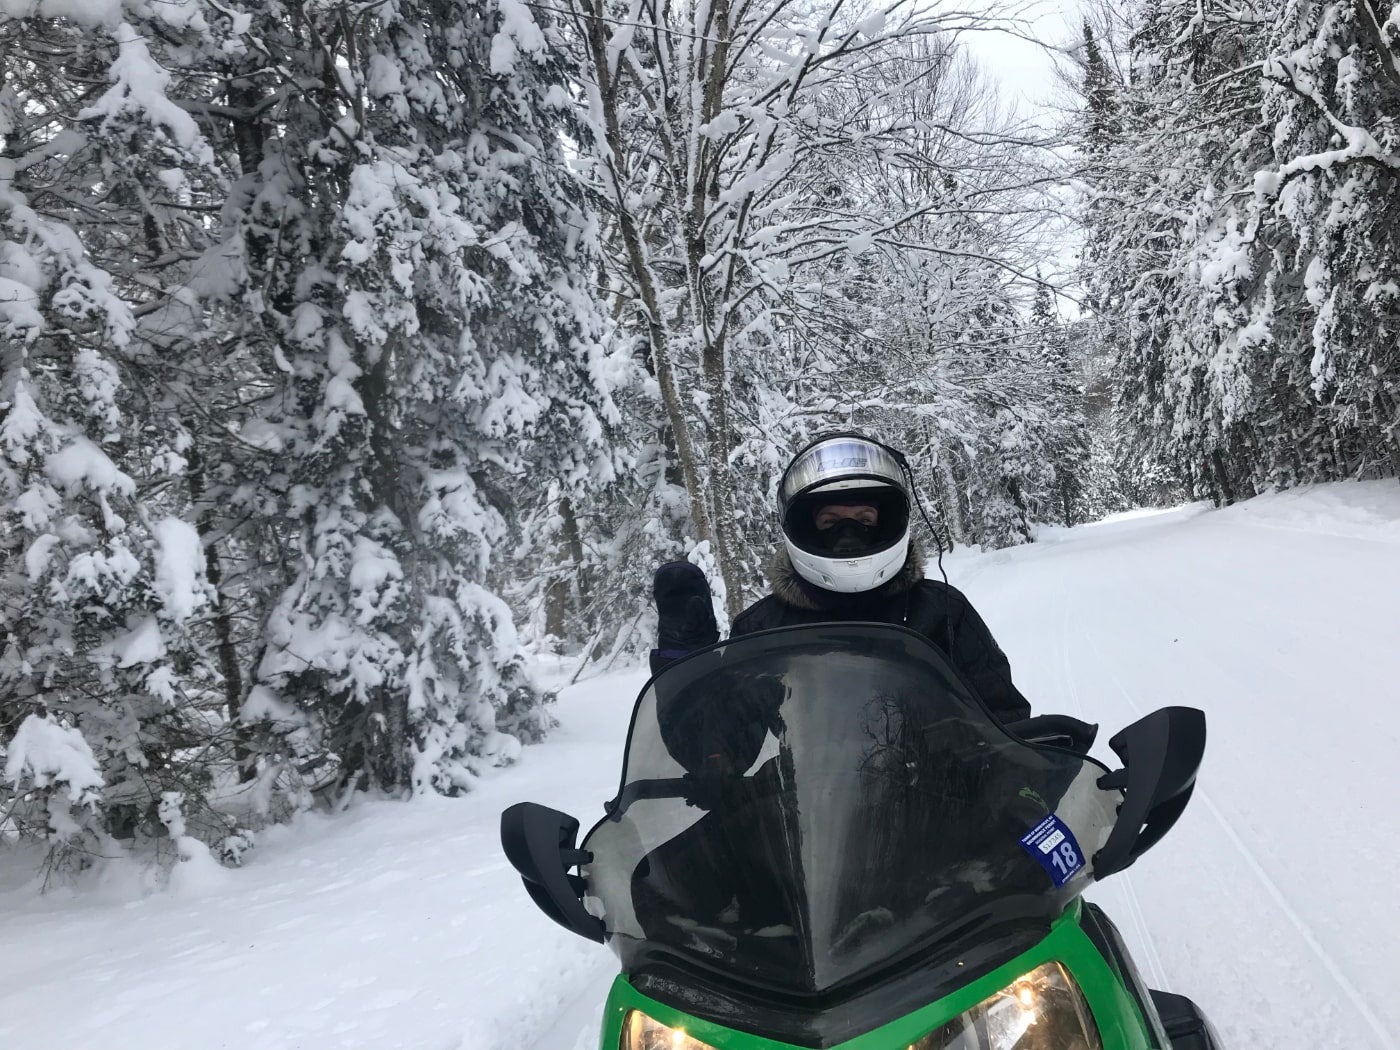 Person on snowmobile in a snow covered forested area waving to camera